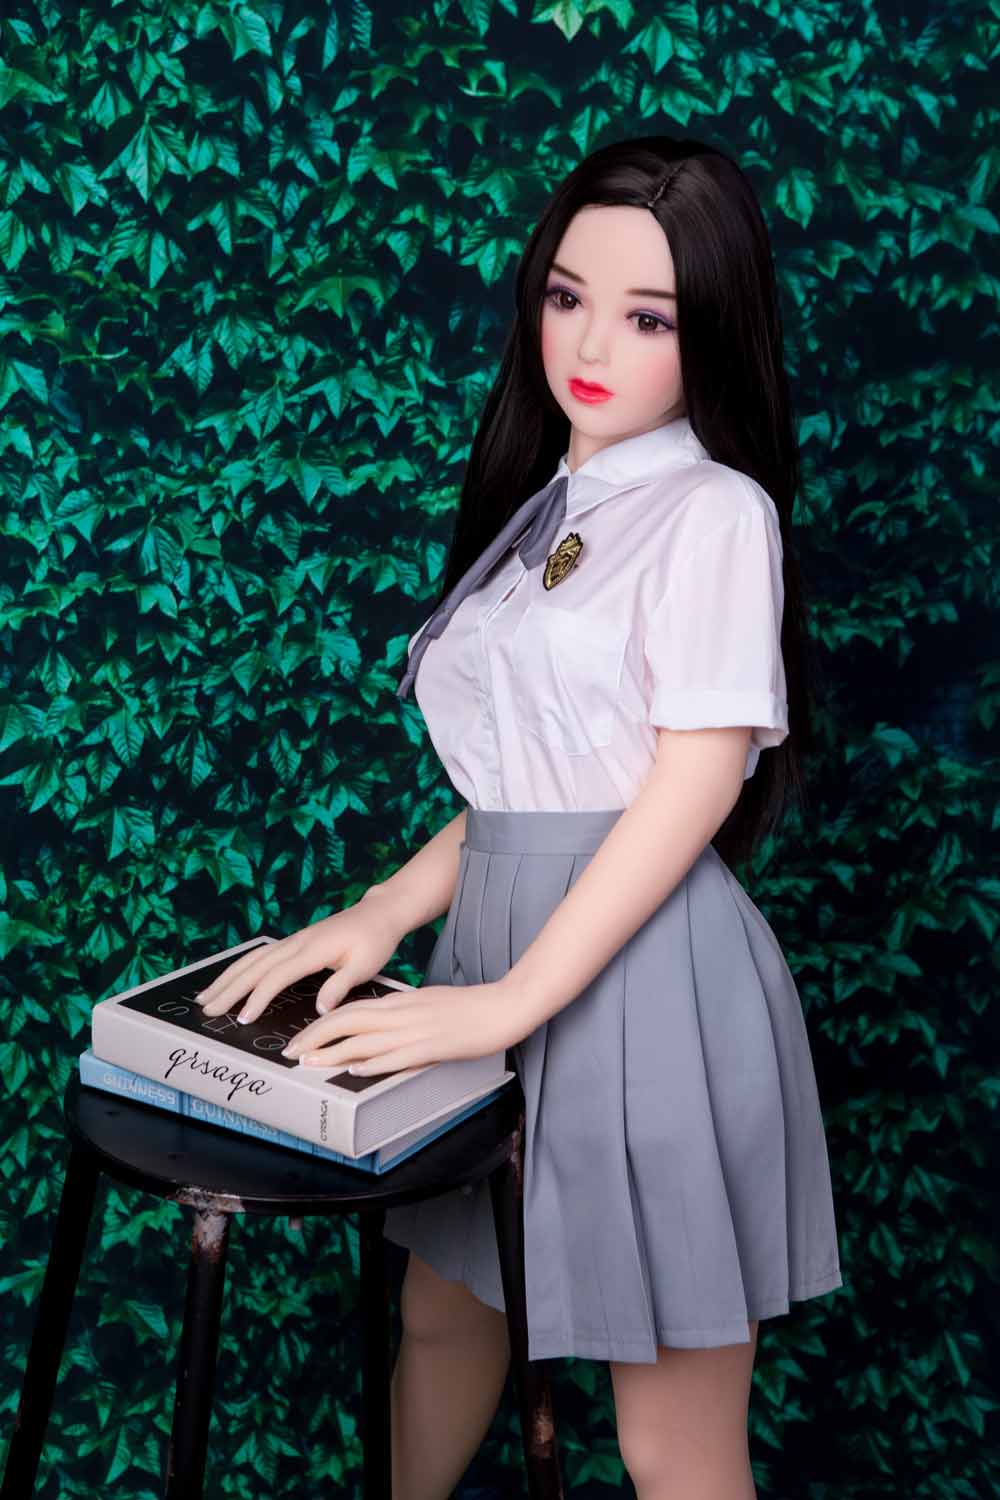 Mini sex doll with a book on a stool